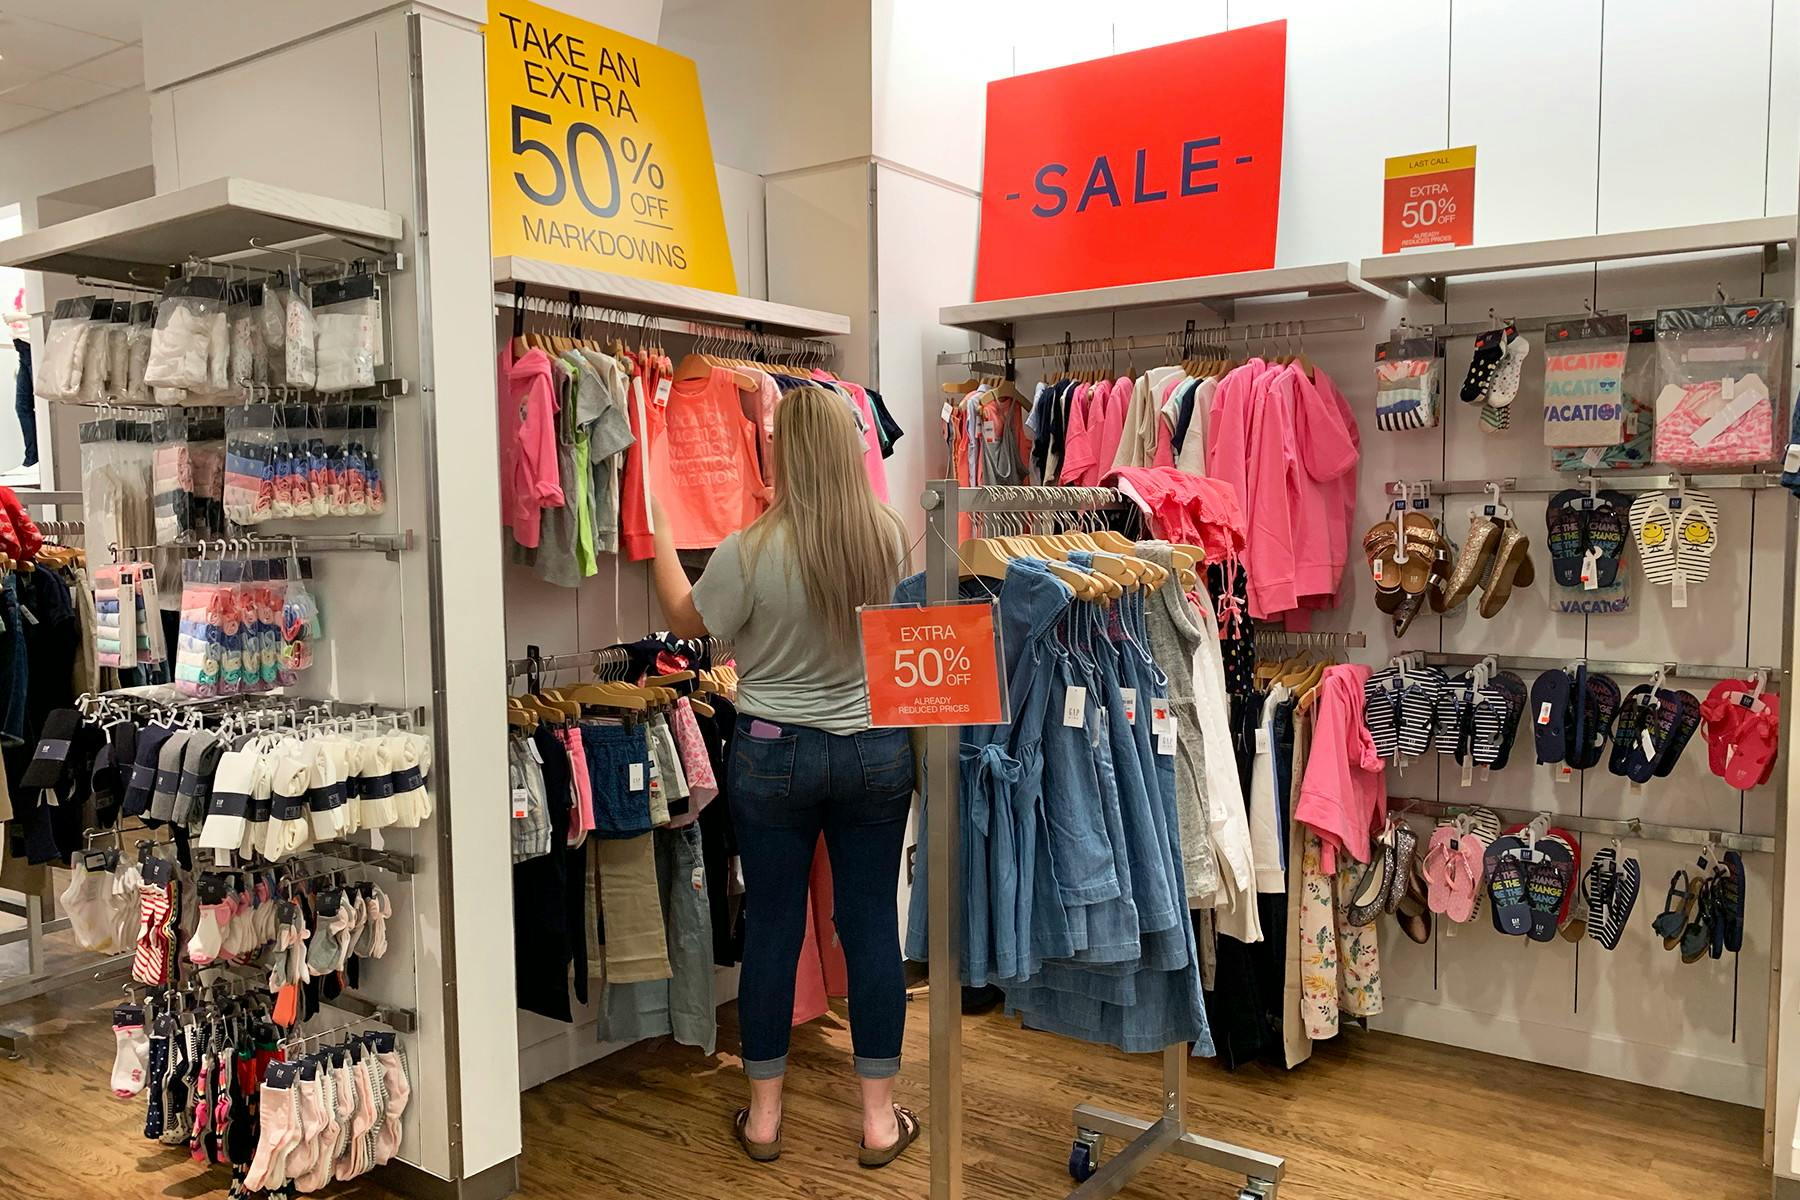 27 Gap Shopping Tips To Save Big In Store And Online The Krazy Coupon Lady